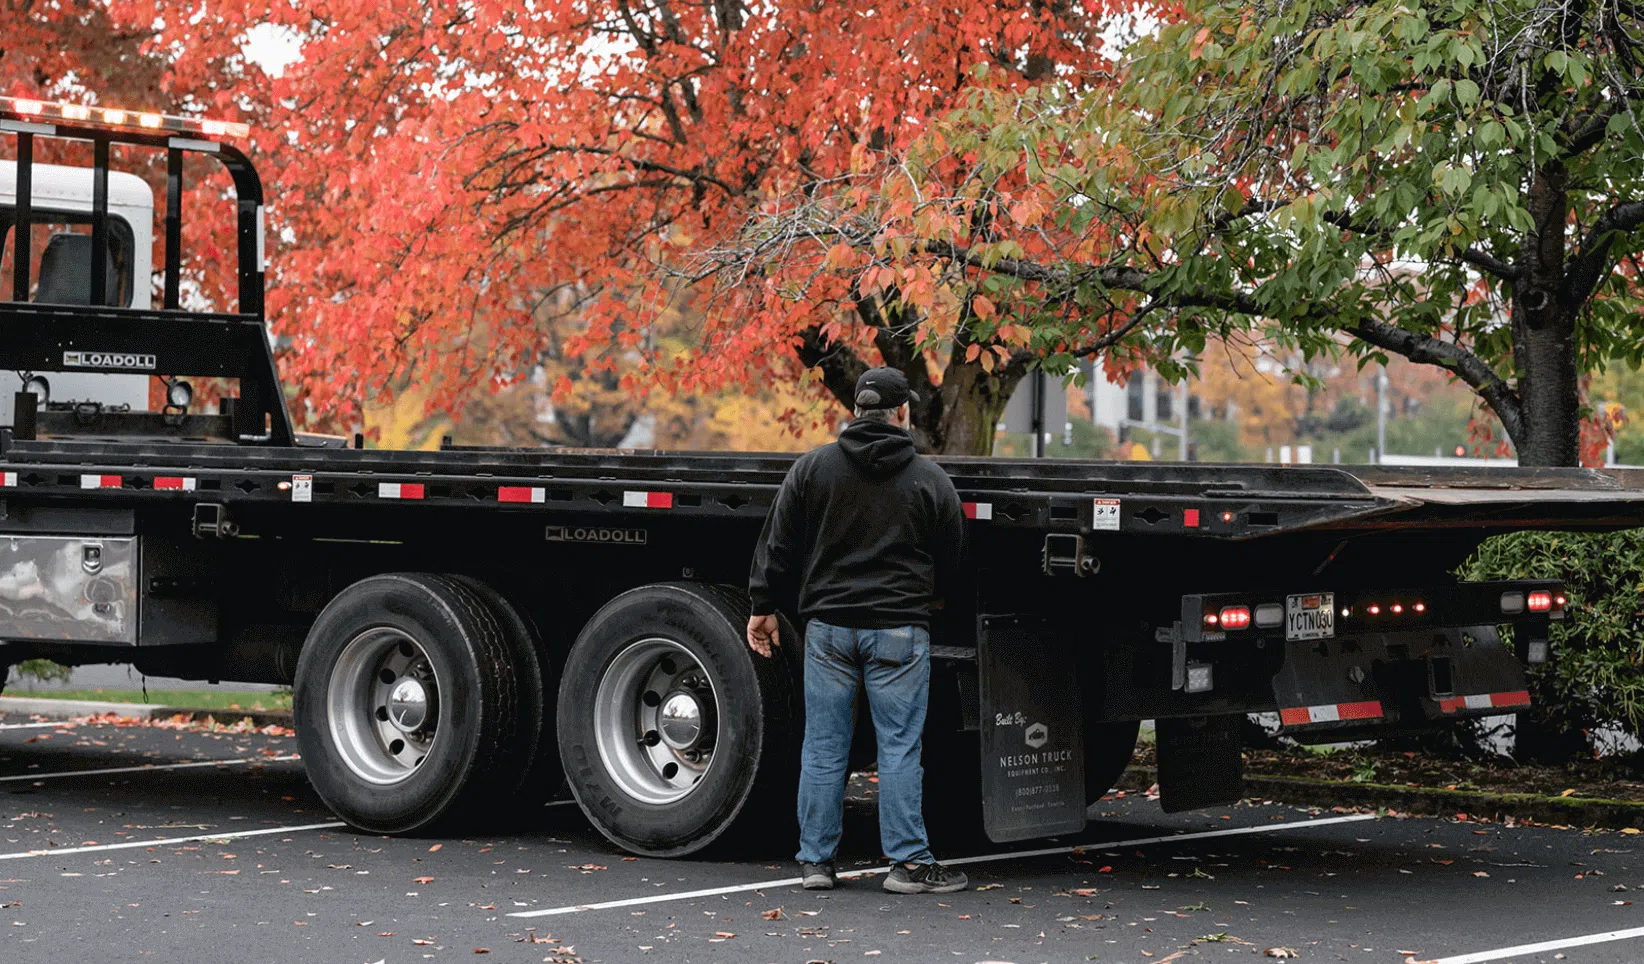 A person standing in front of the truck back.